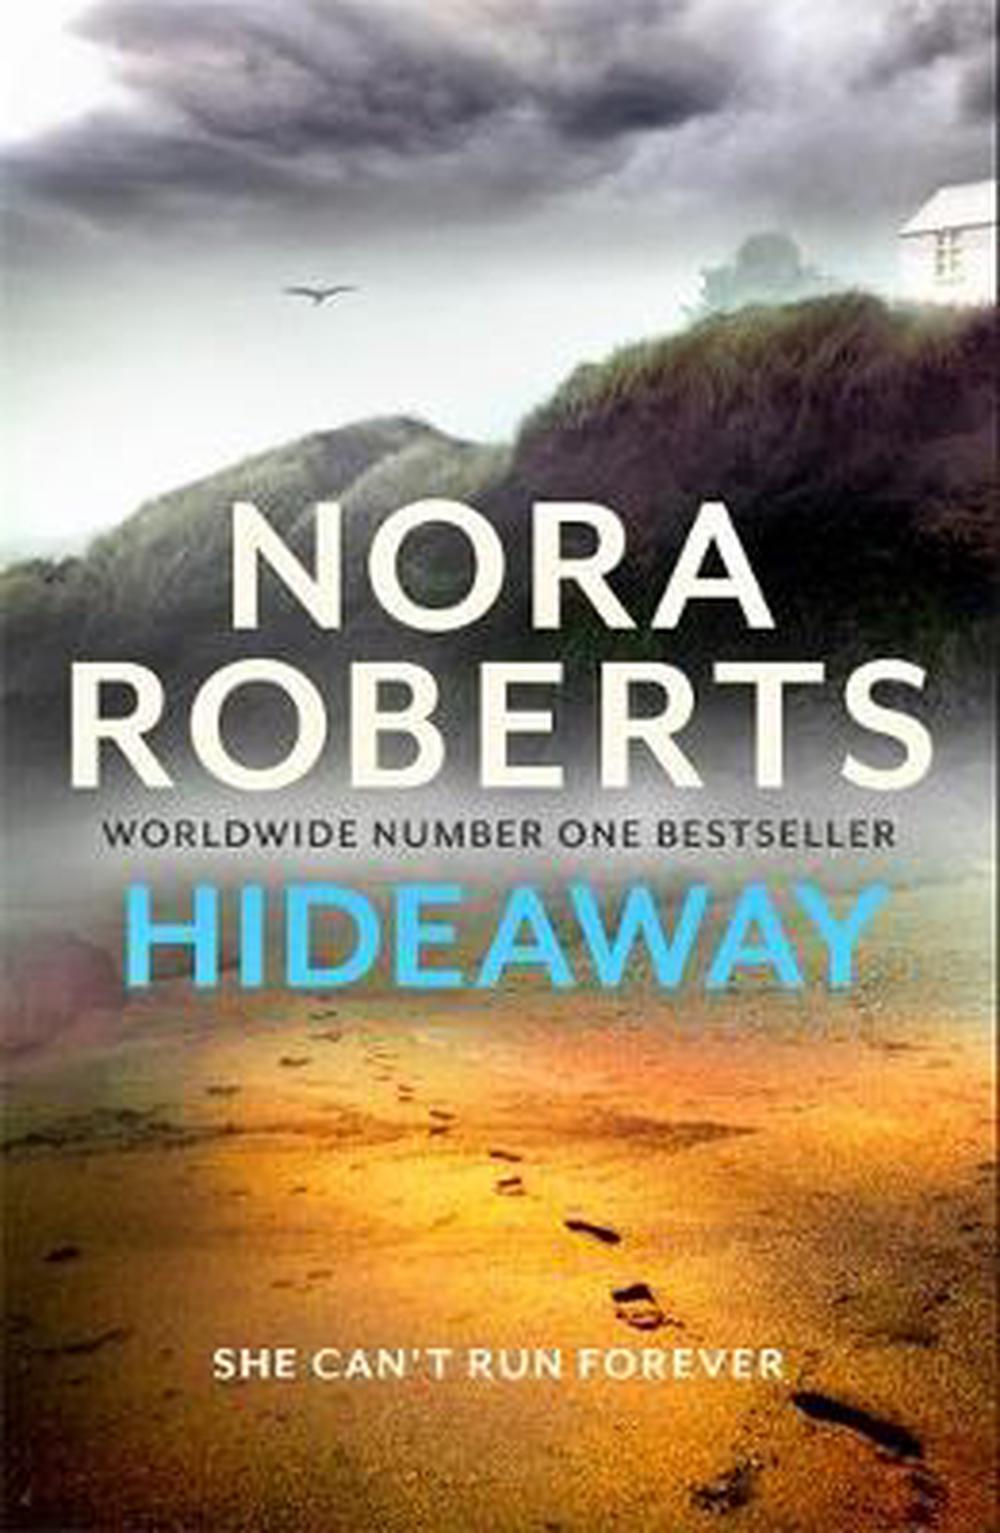 book hideaway by nora roberts